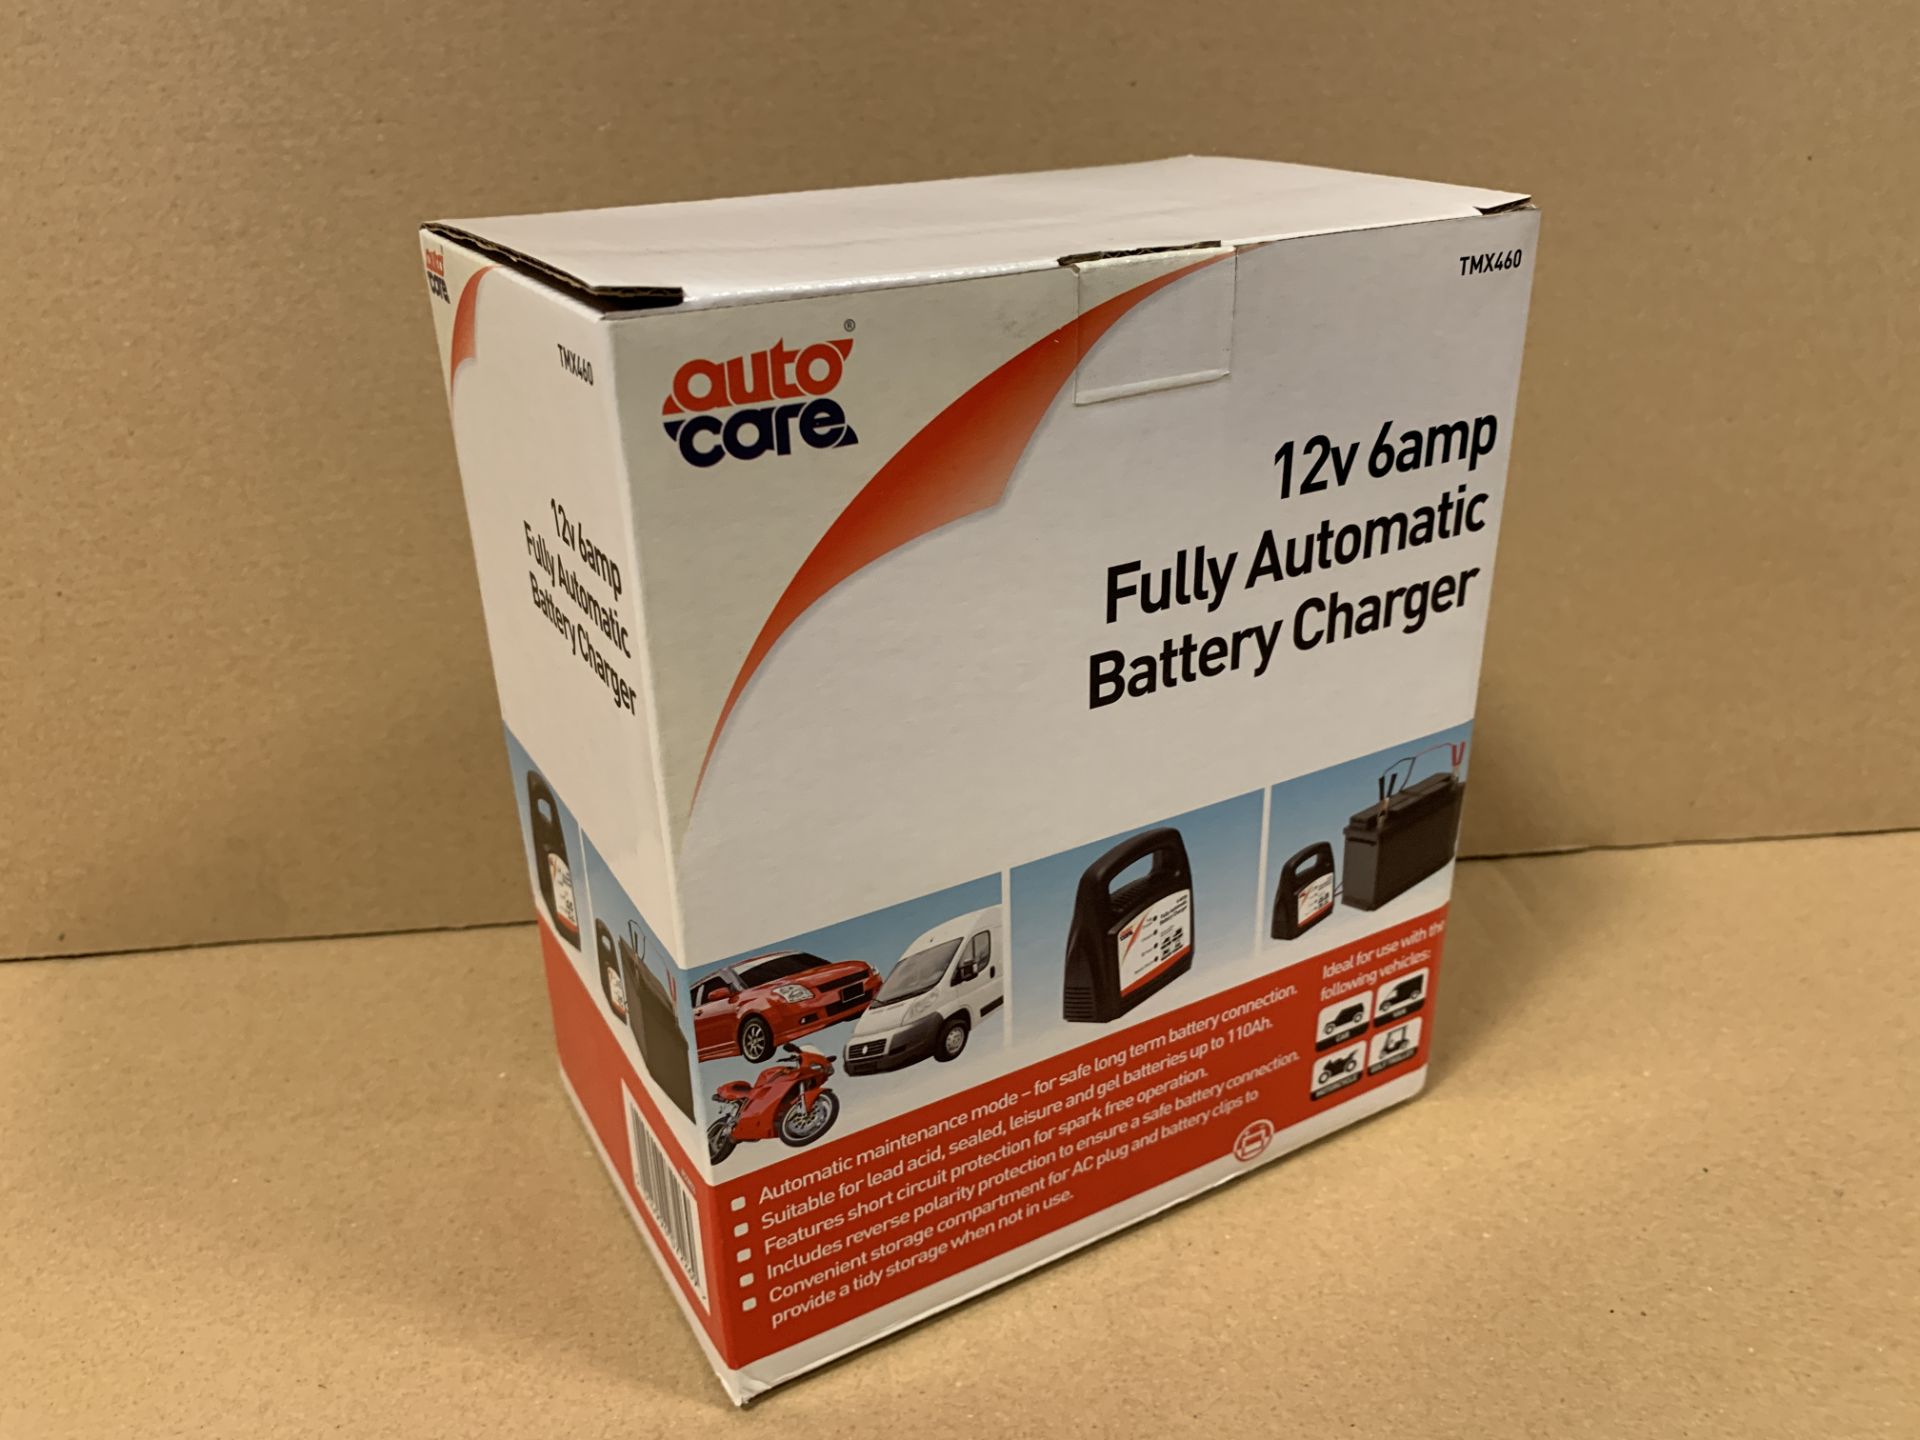 10 X BRAND NEW 12V 6AMP FULLY AUTOMATIC BATTERY CHARGERS